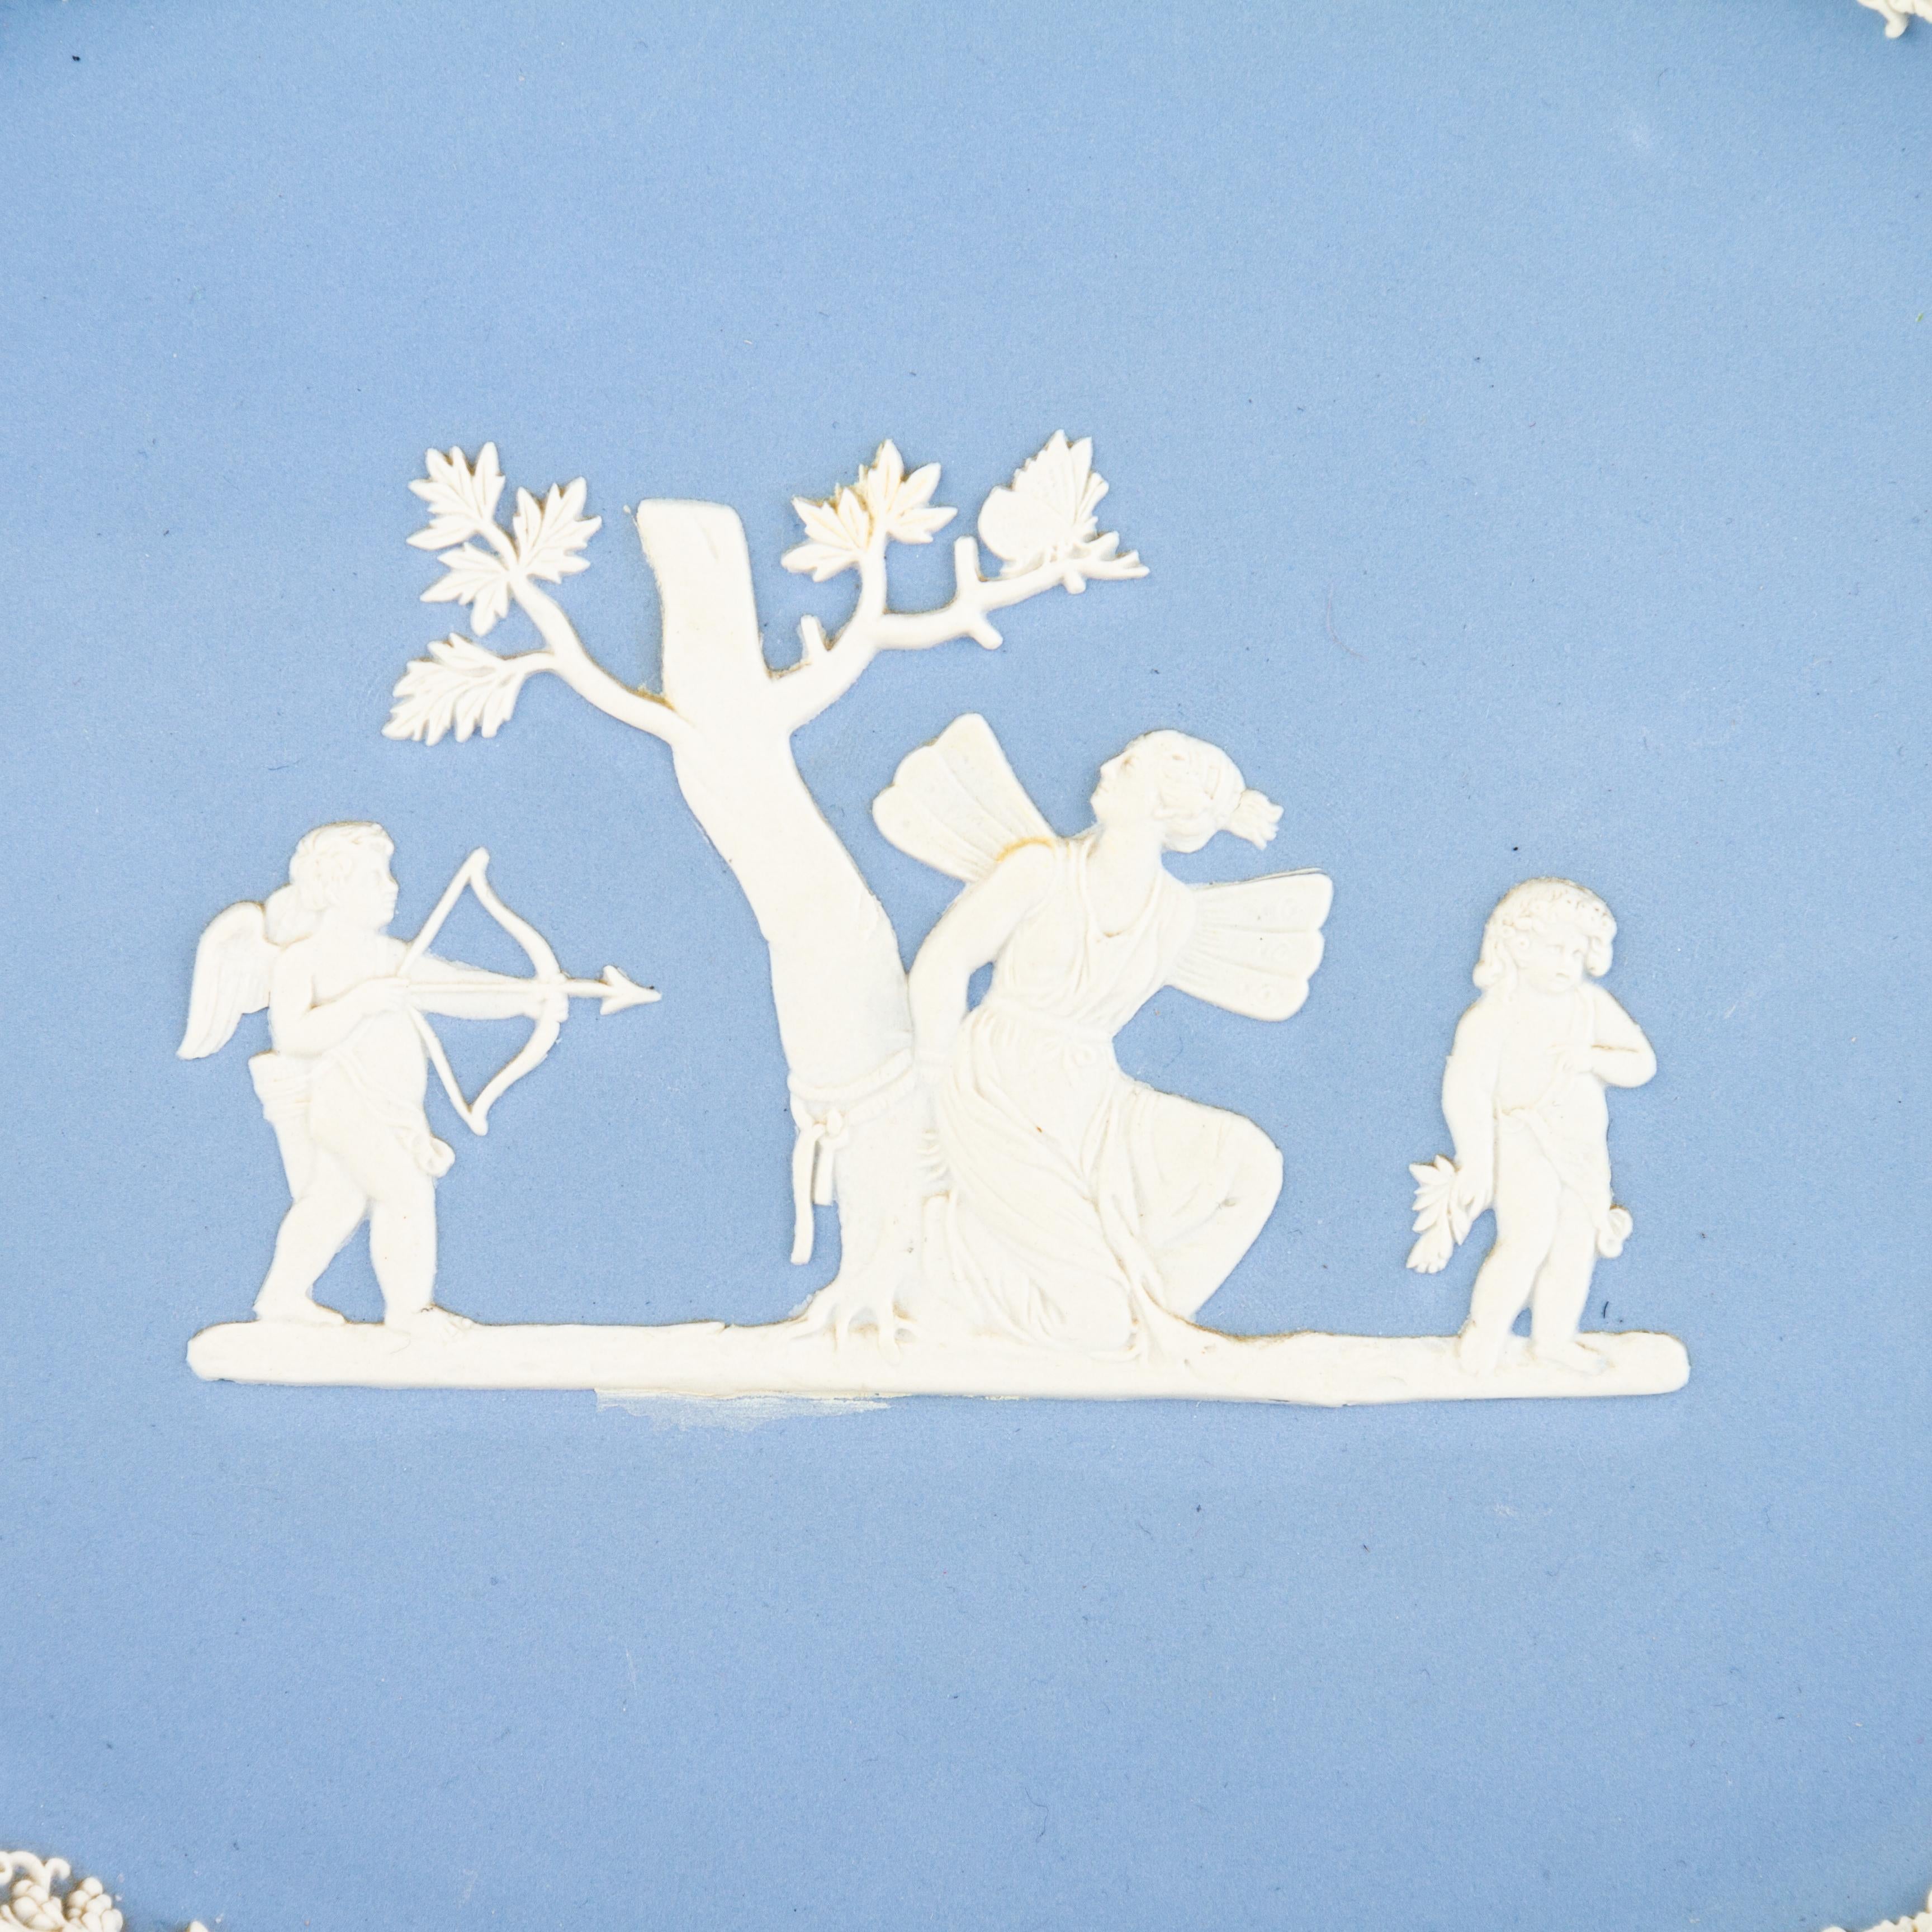 Wedgwood Blue Jasperware Neoclassical Oval Plate Tray 
Good condition
Free international shipping.